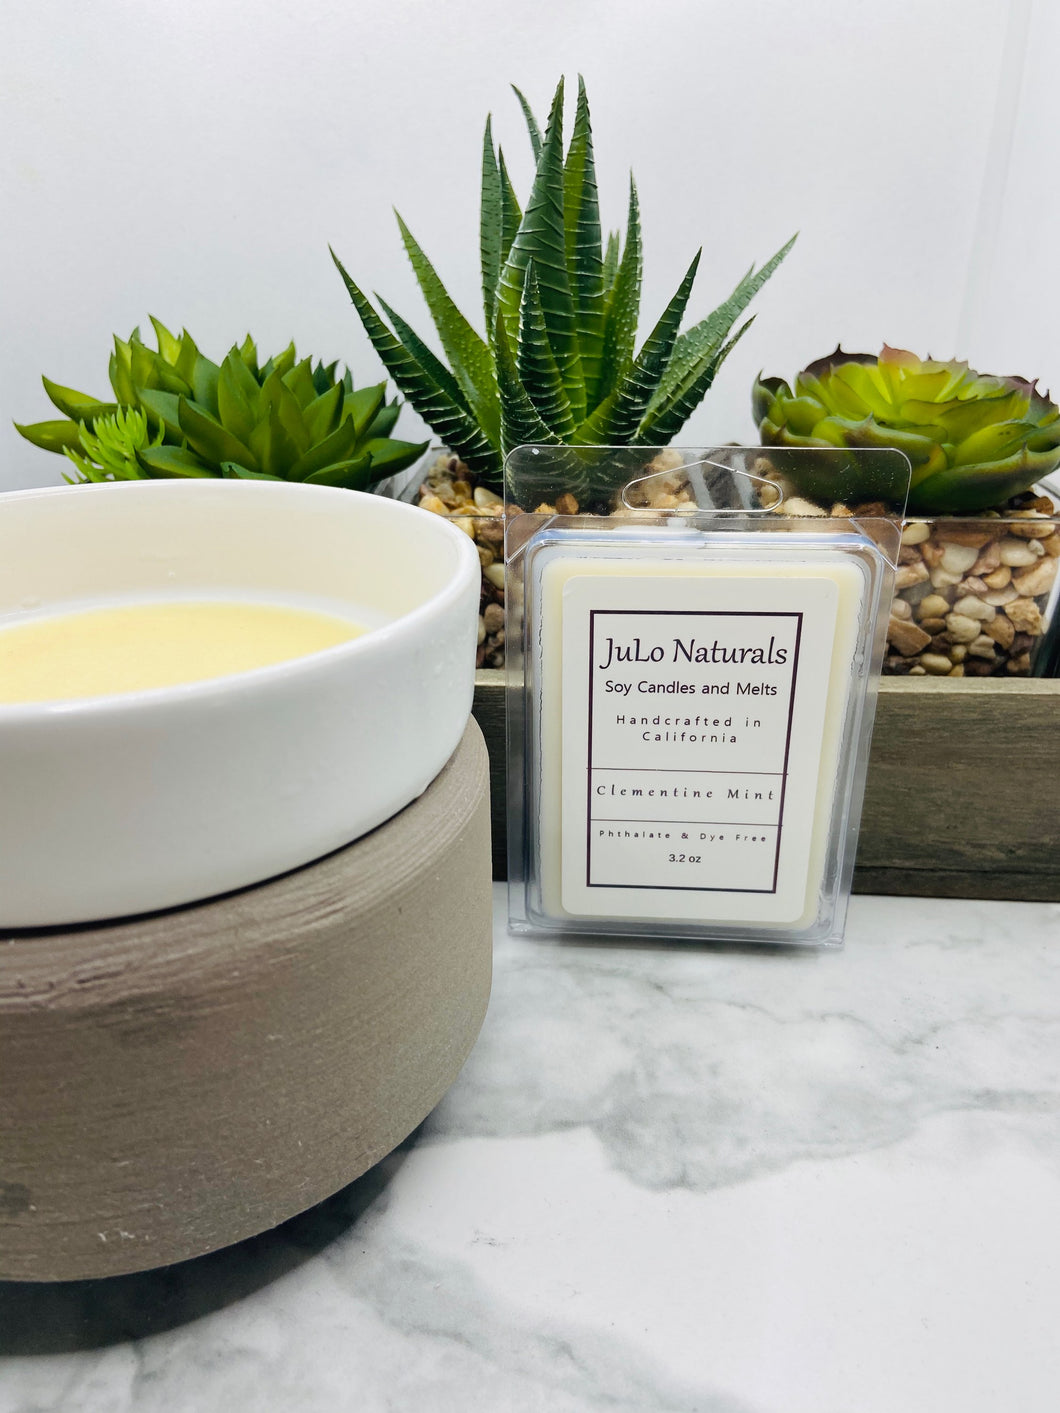 Our Clementine Mint Soy Wax Melts are the perfect handmade candle gift for her or for your home!